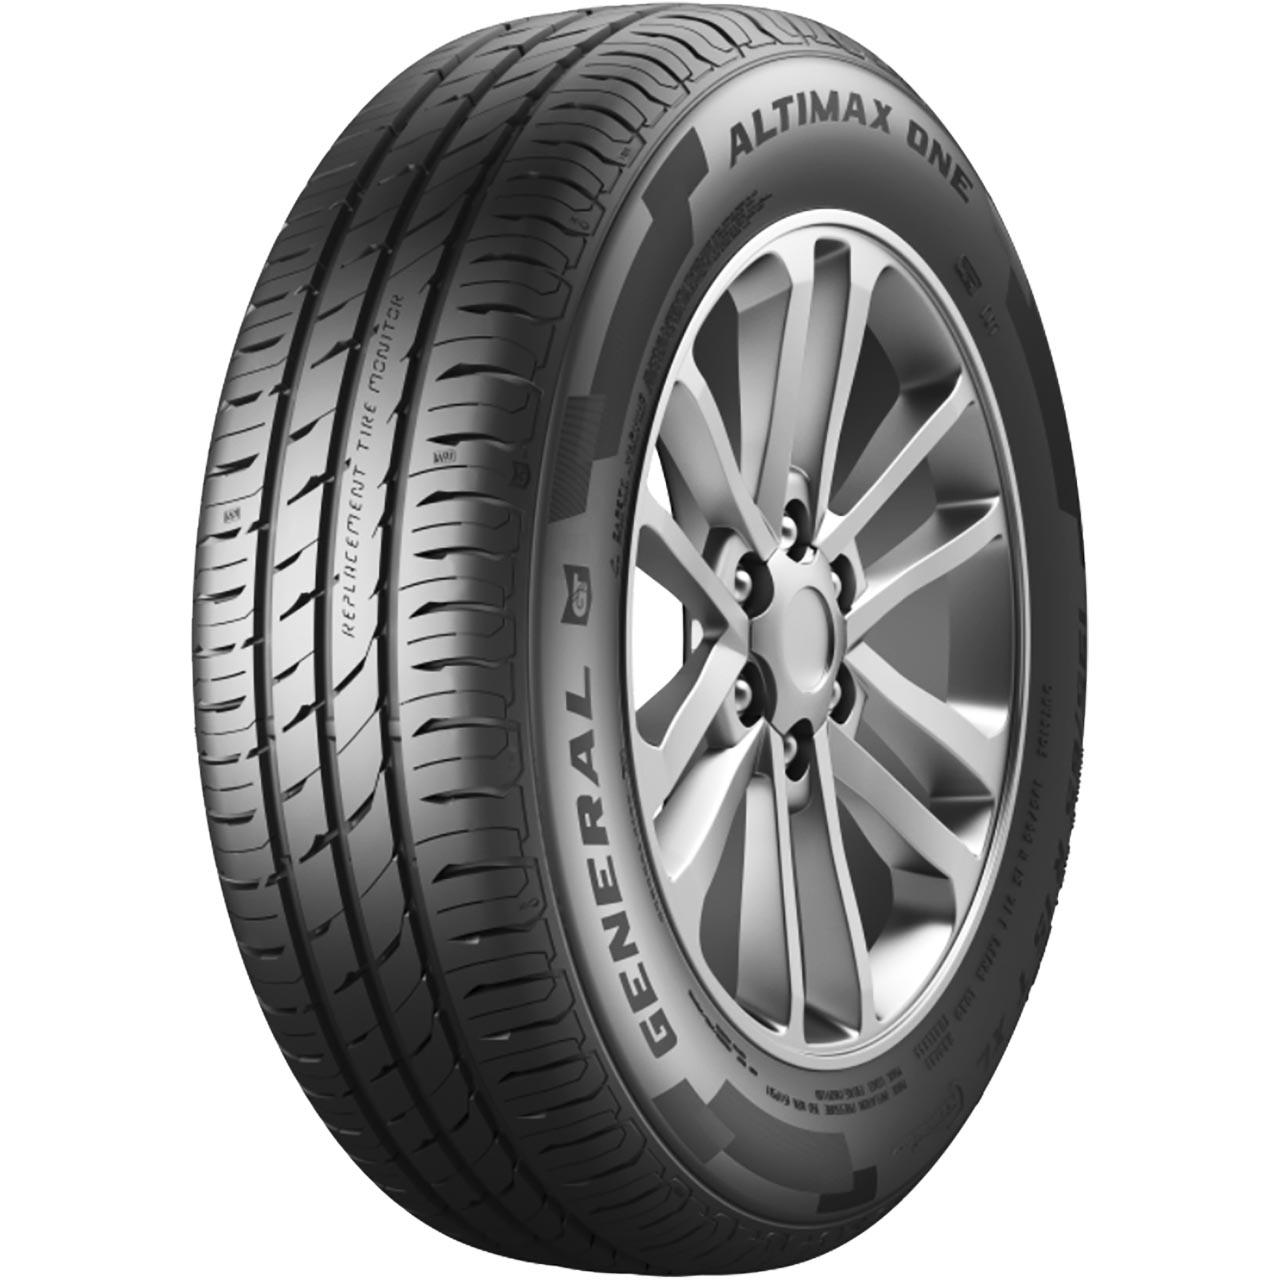 GENERAL TIRE ALTIMAX ONE